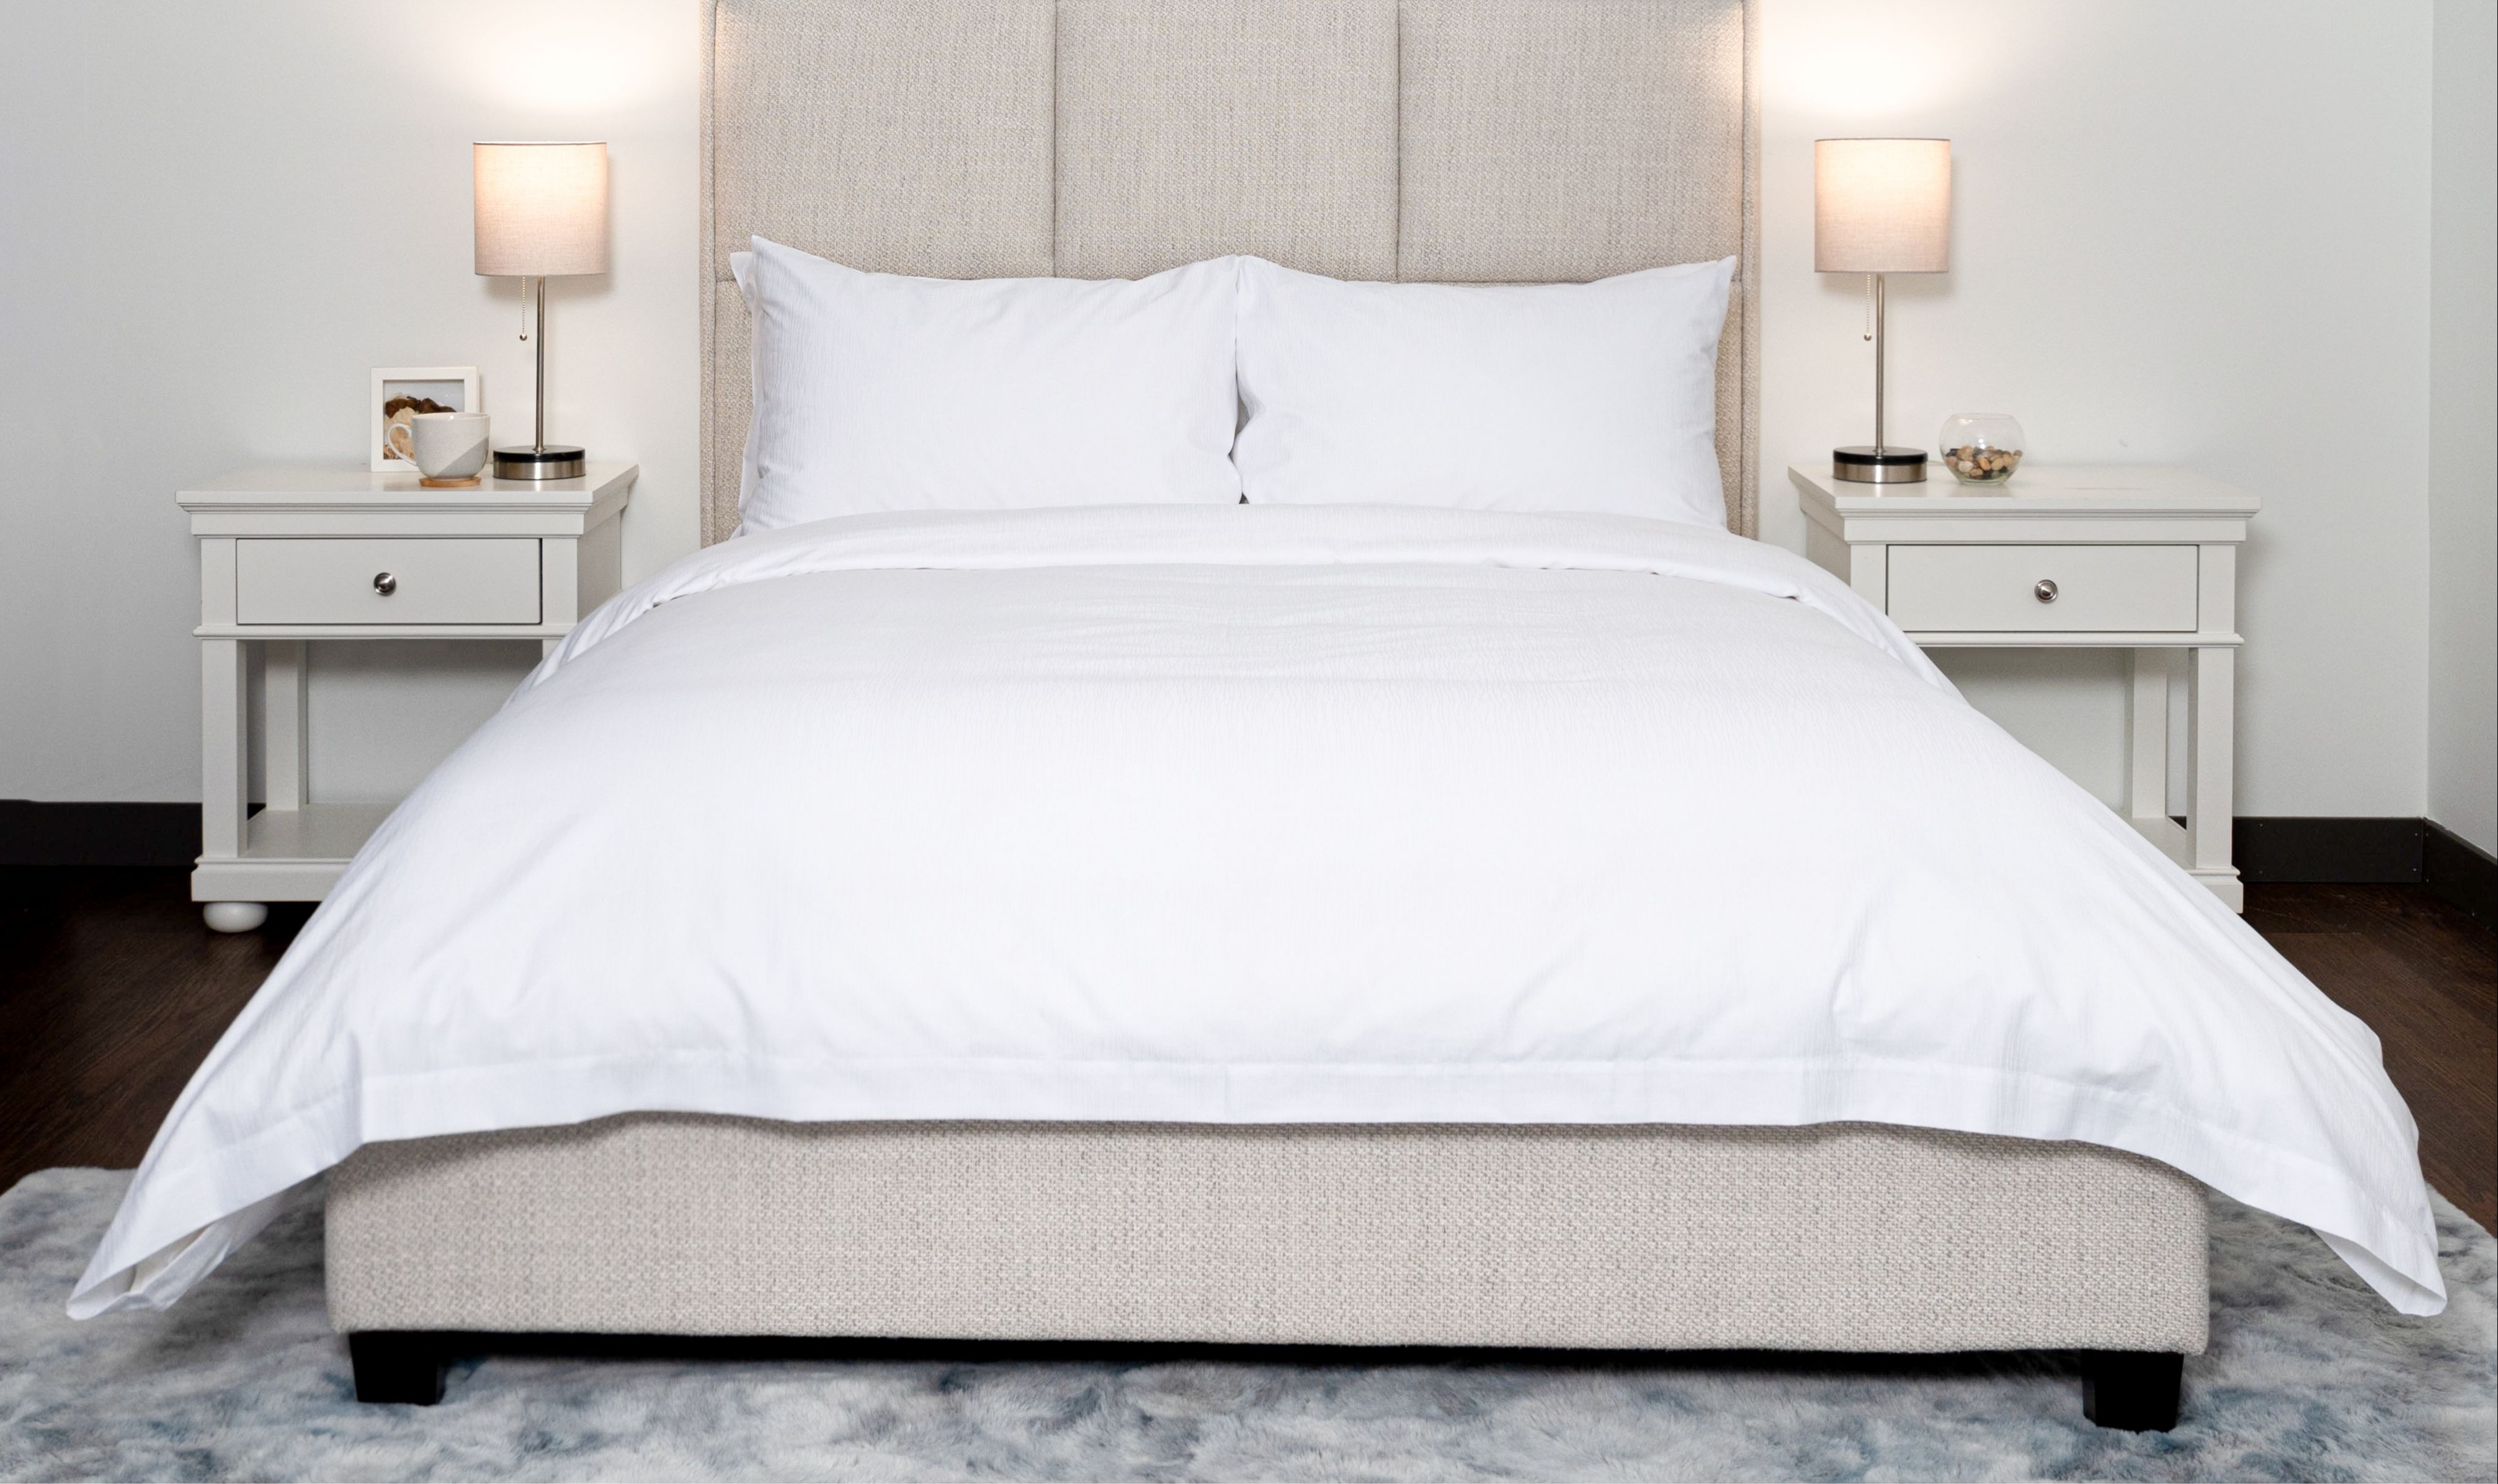 Indulgence T-250 Sheets and Duvet Covers